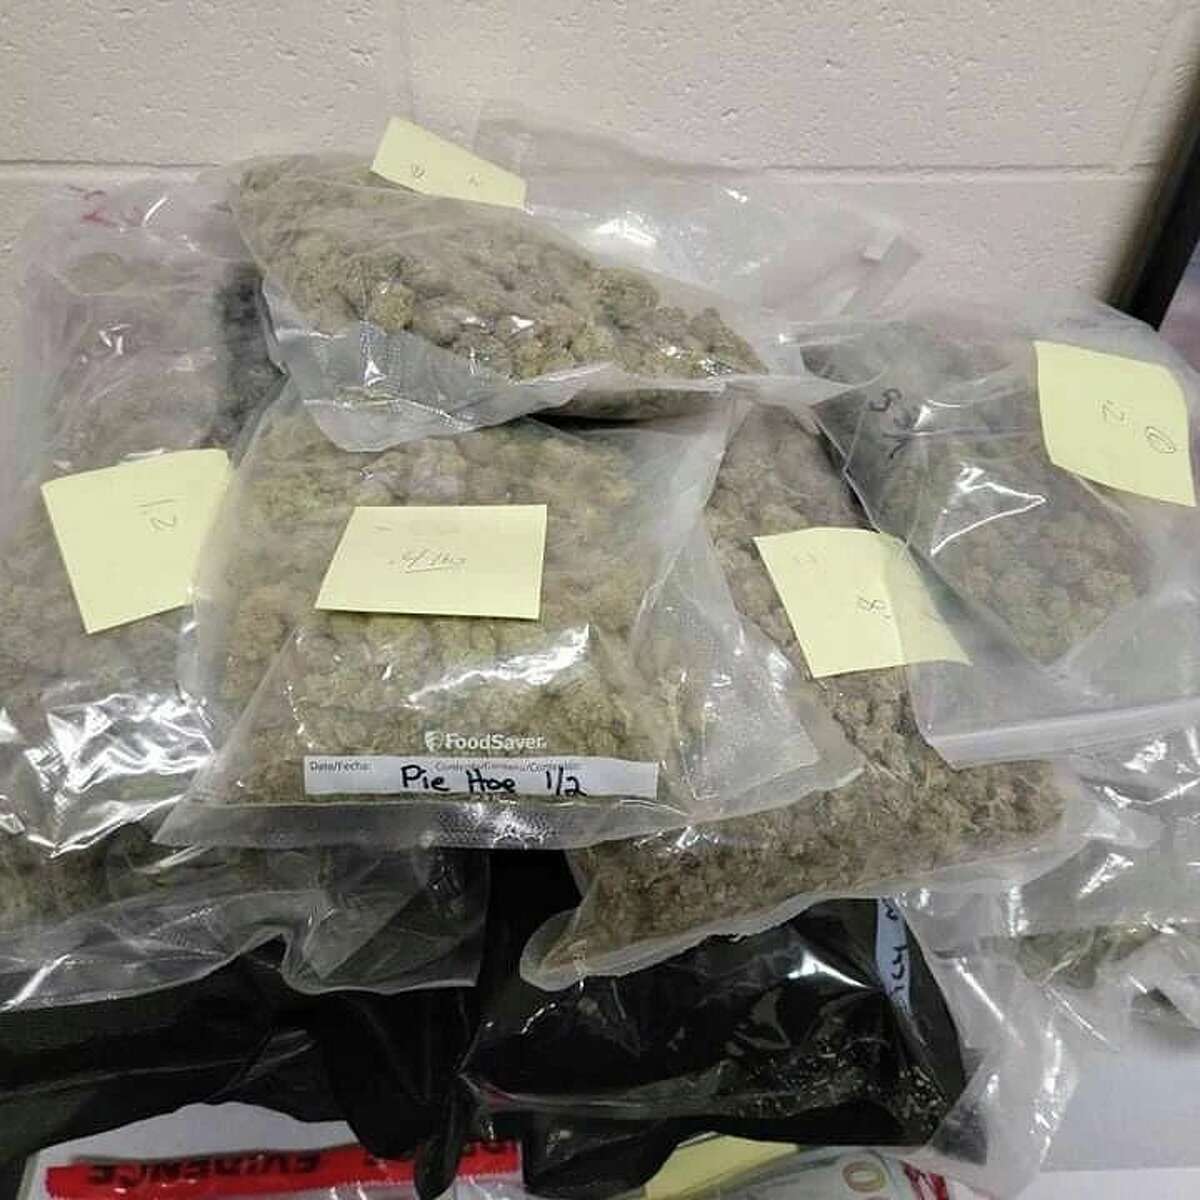 A Bridgewater man was busted with pounds of marijuana, an assortment of THC-infused edibles, 185 Adderall pills, drug paraphernalia and more than $25,000 in cash following a Monday night traffic stop in Roxbury.